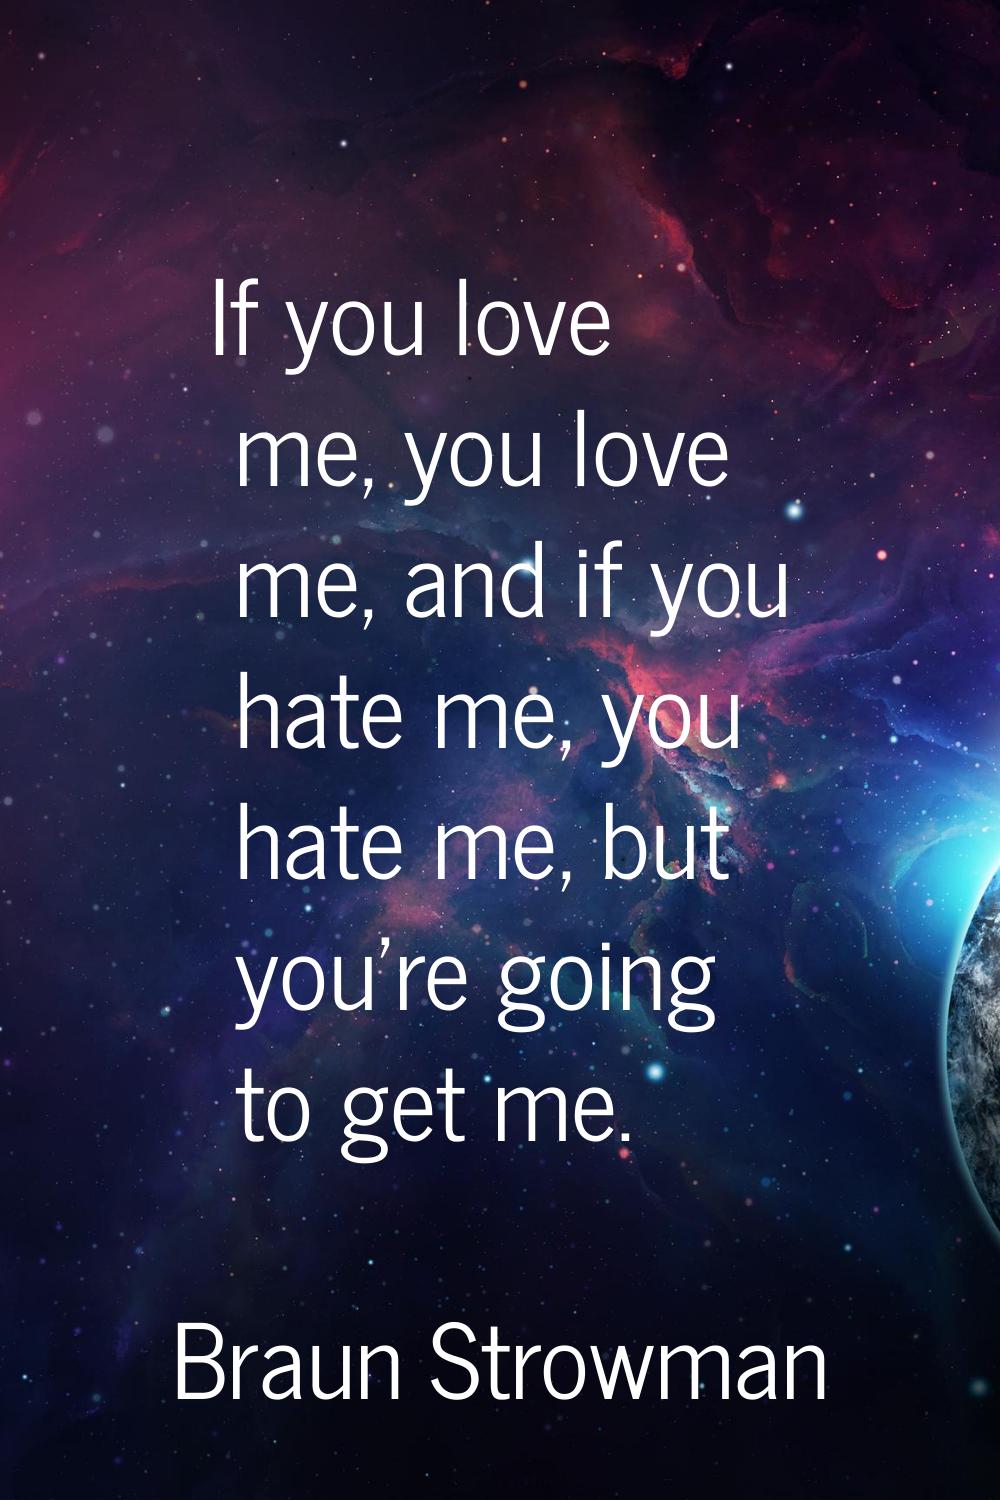 If you love me, you love me, and if you hate me, you hate me, but you're going to get me.